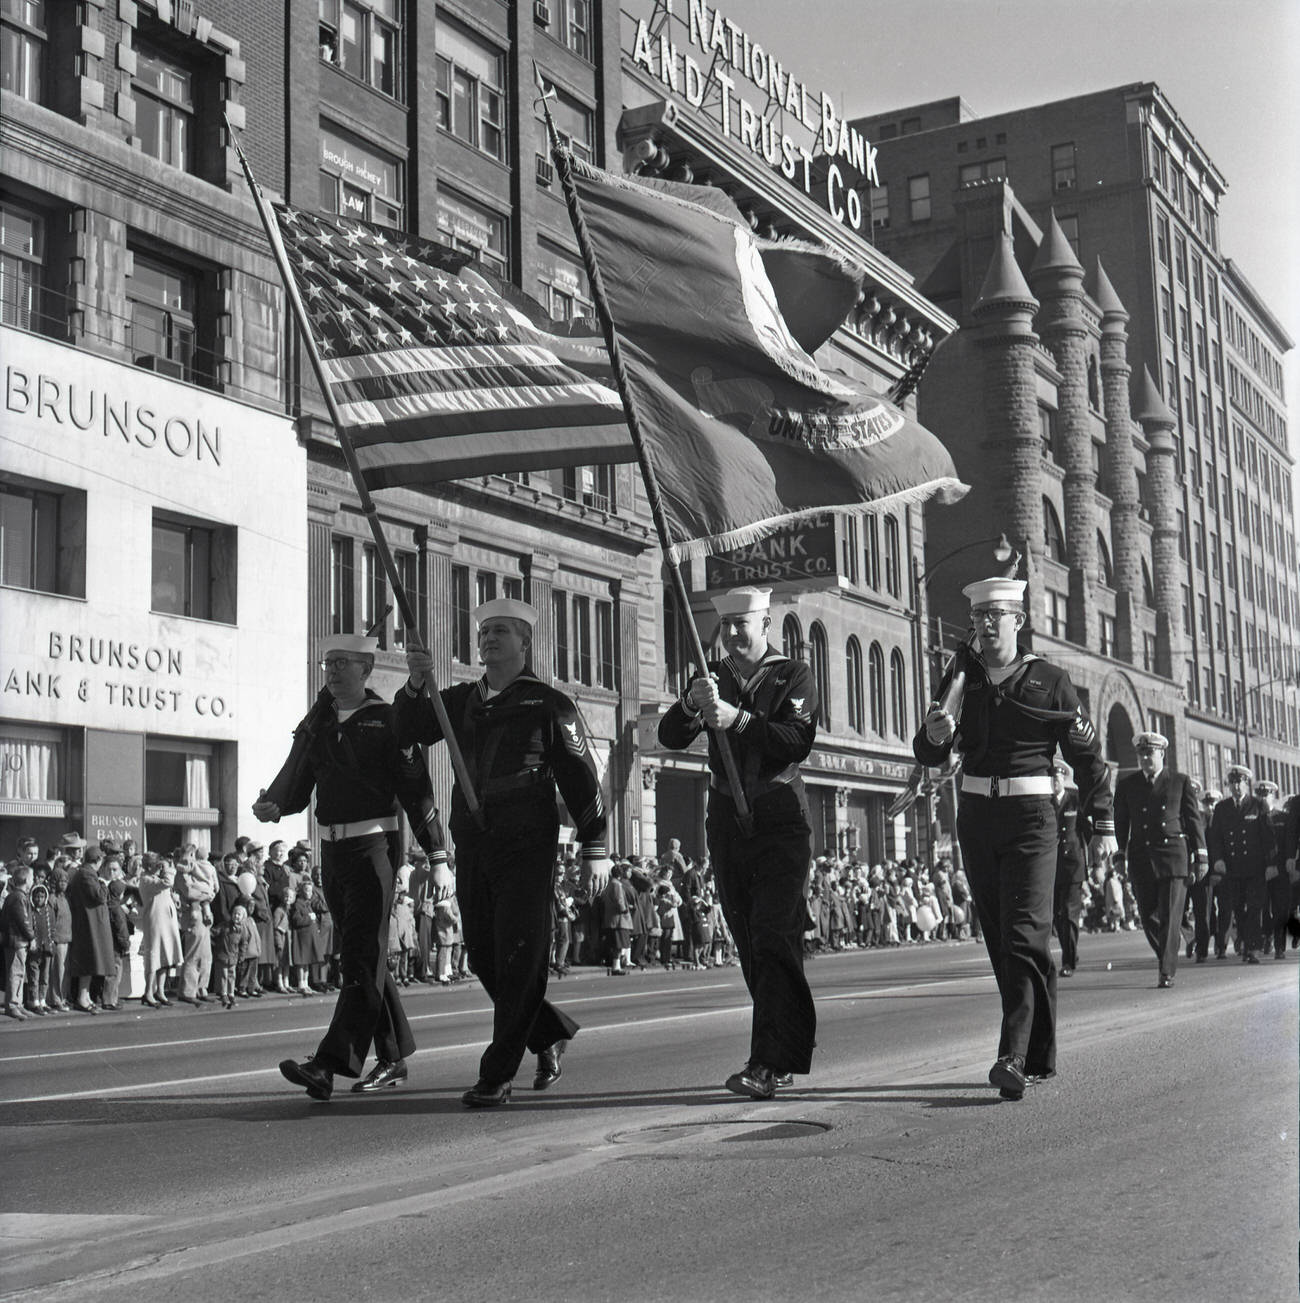 East Broad Street Parade with Brunson Bank & Trust and Chamber of Commerce Building, 1940s